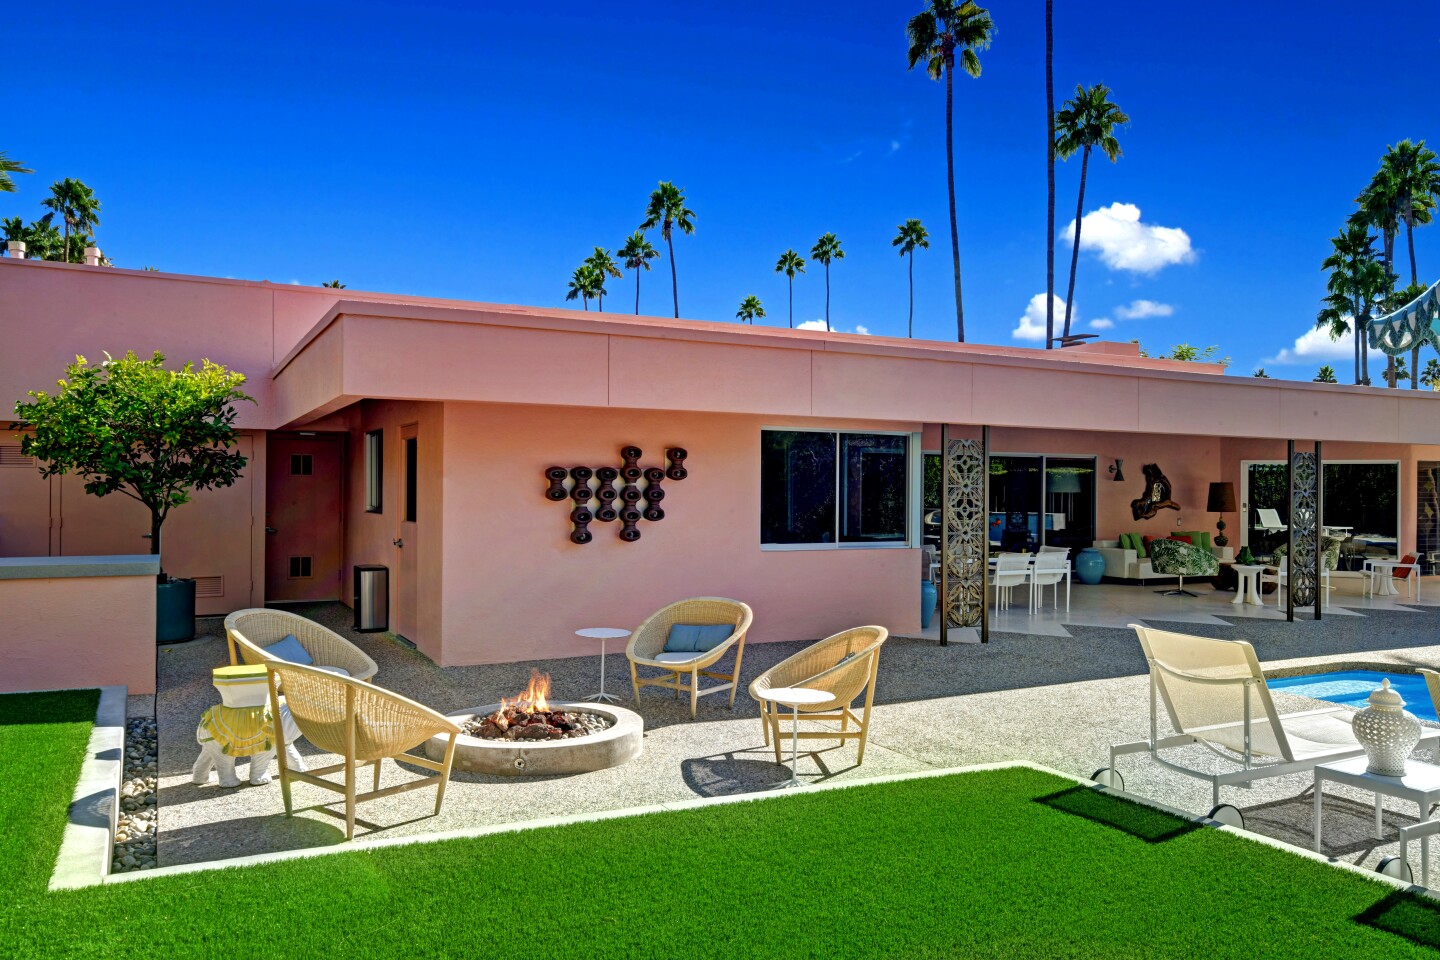 Designed by local architects Albert Frey and Robson Chambers, the pink-hued residence unfolds as a series of interconnected boxes. The home was built in 1964 for radio and TV owner Carl Haymond and his wife, Margaret. Listed for $2.995 million, the house features a series of aluminum screens that provide privacy while diffusing natural light. The screens were designed by John deKoven Hill, an associate of Frank Lloyd Wright. The single-story house features travertine and terrazzo tile floors, walls of glass and walnut built-ins. The steel cabinetry in the kitchen is original.